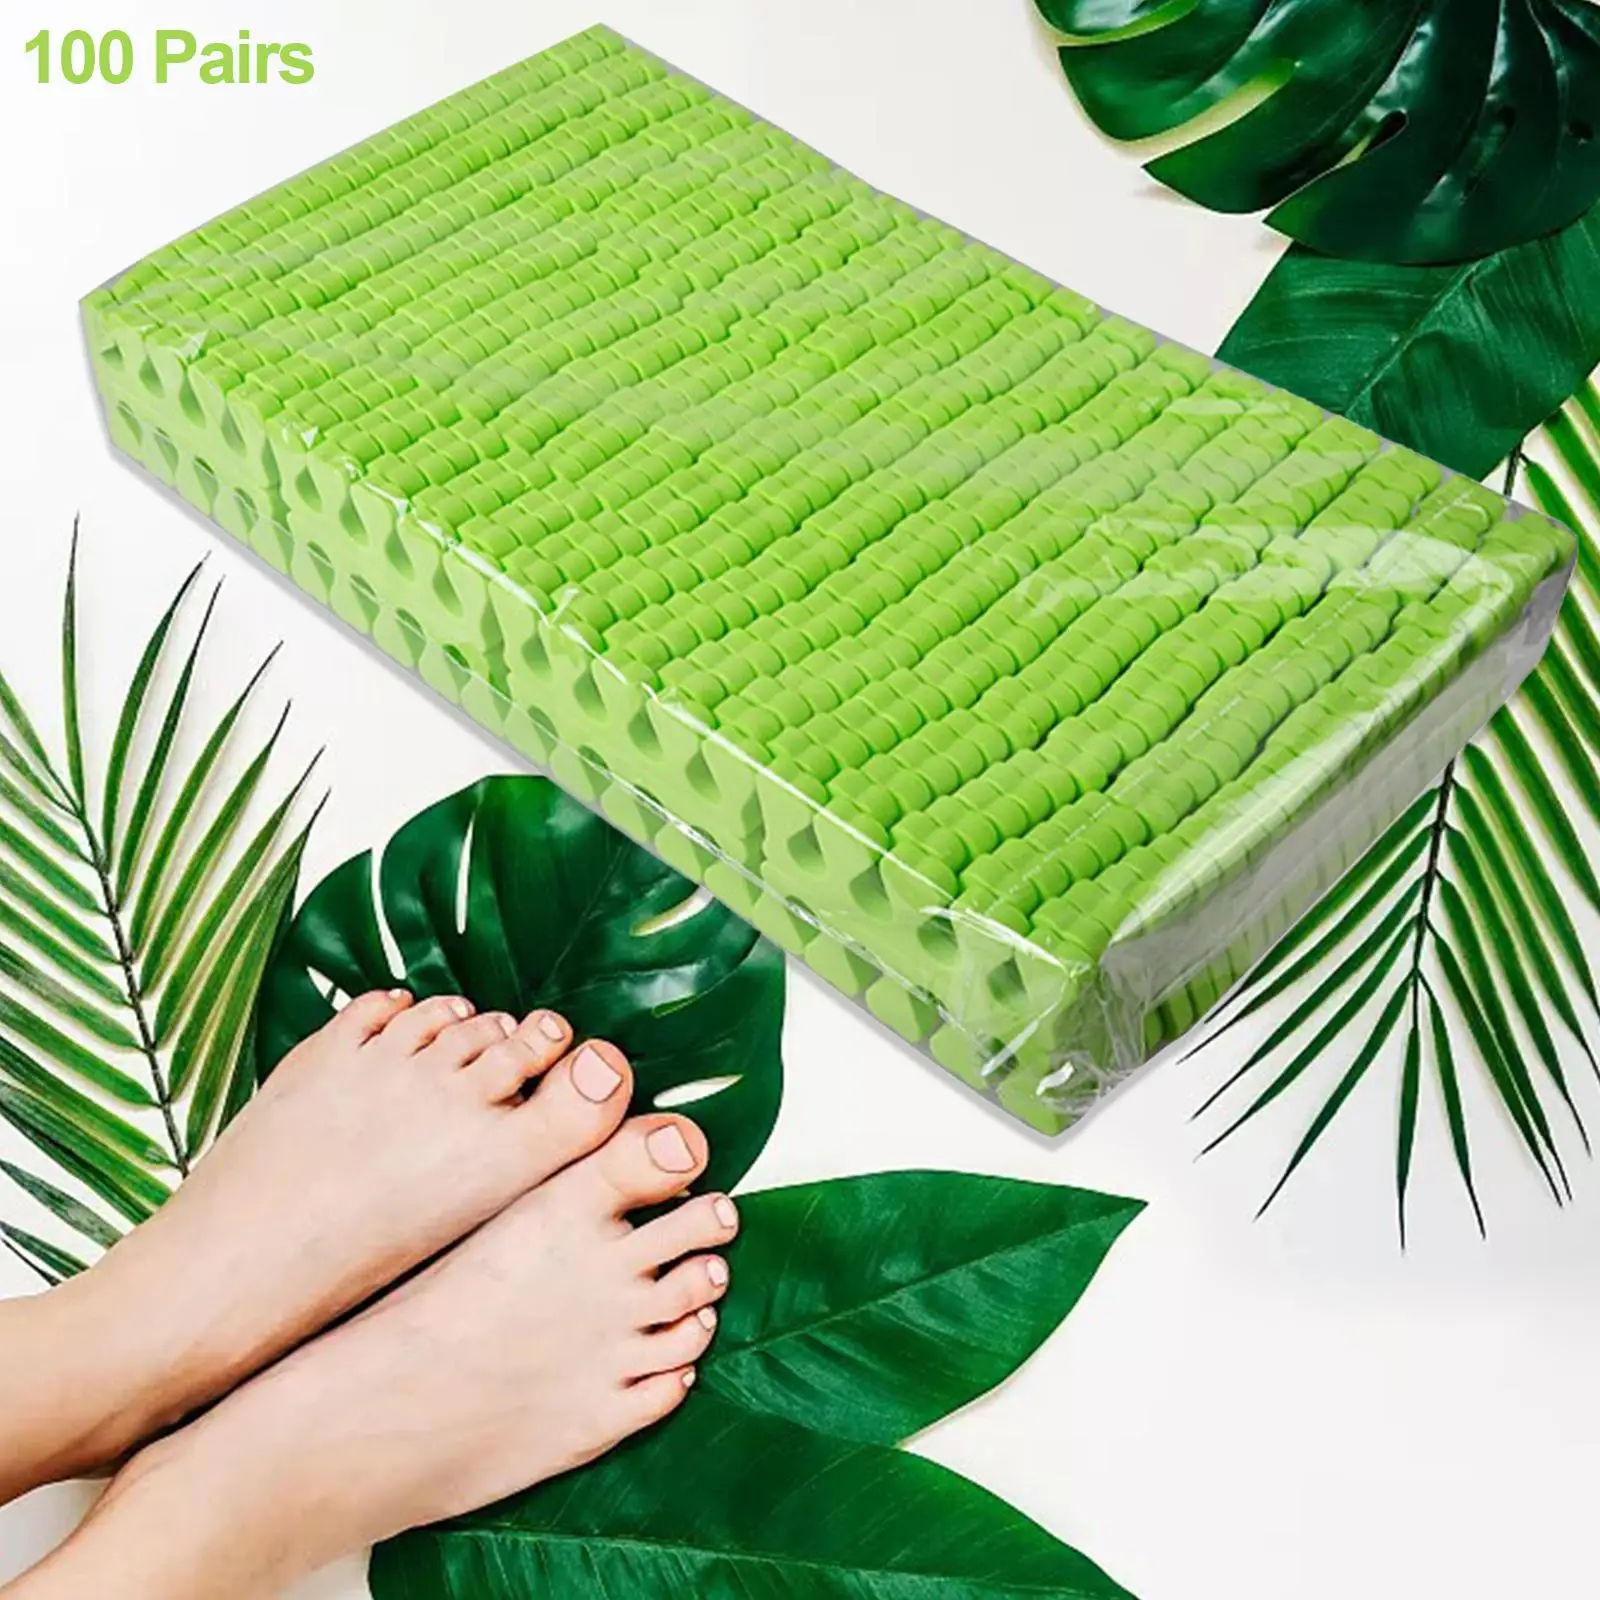 Nail Art Toe Separator Sponge Splitting Device Green Fingers Separators for Manicure Home Use Old Teen Pedicures 100 Pairs